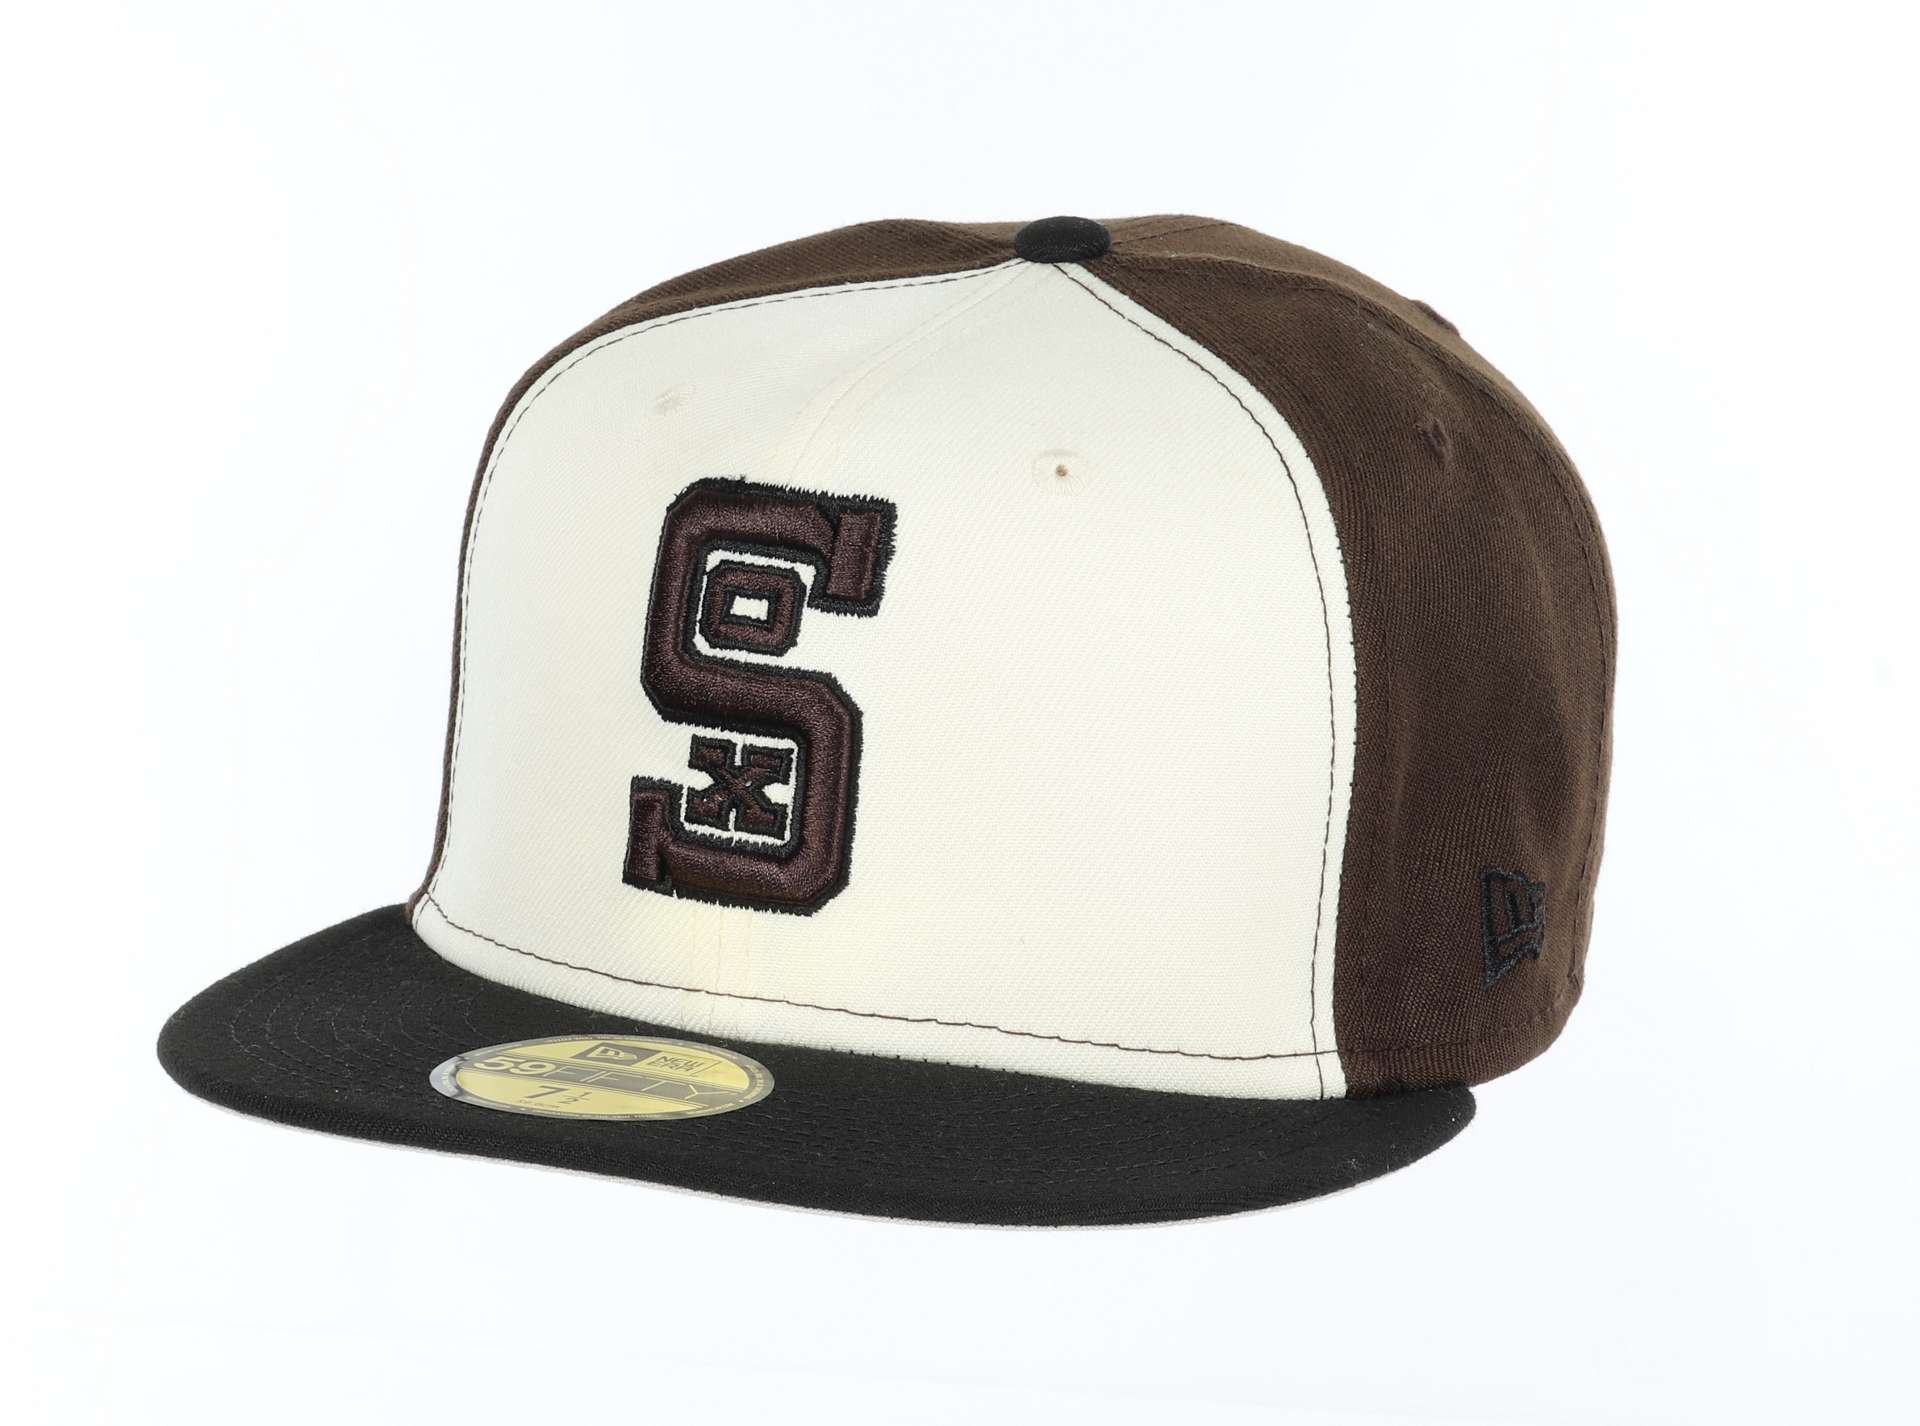 Chicago White Sox MLB Cooperstown American League Golden Anniversary Sidepatch Chrome Walnut Black 59Fifty Basecap New Era